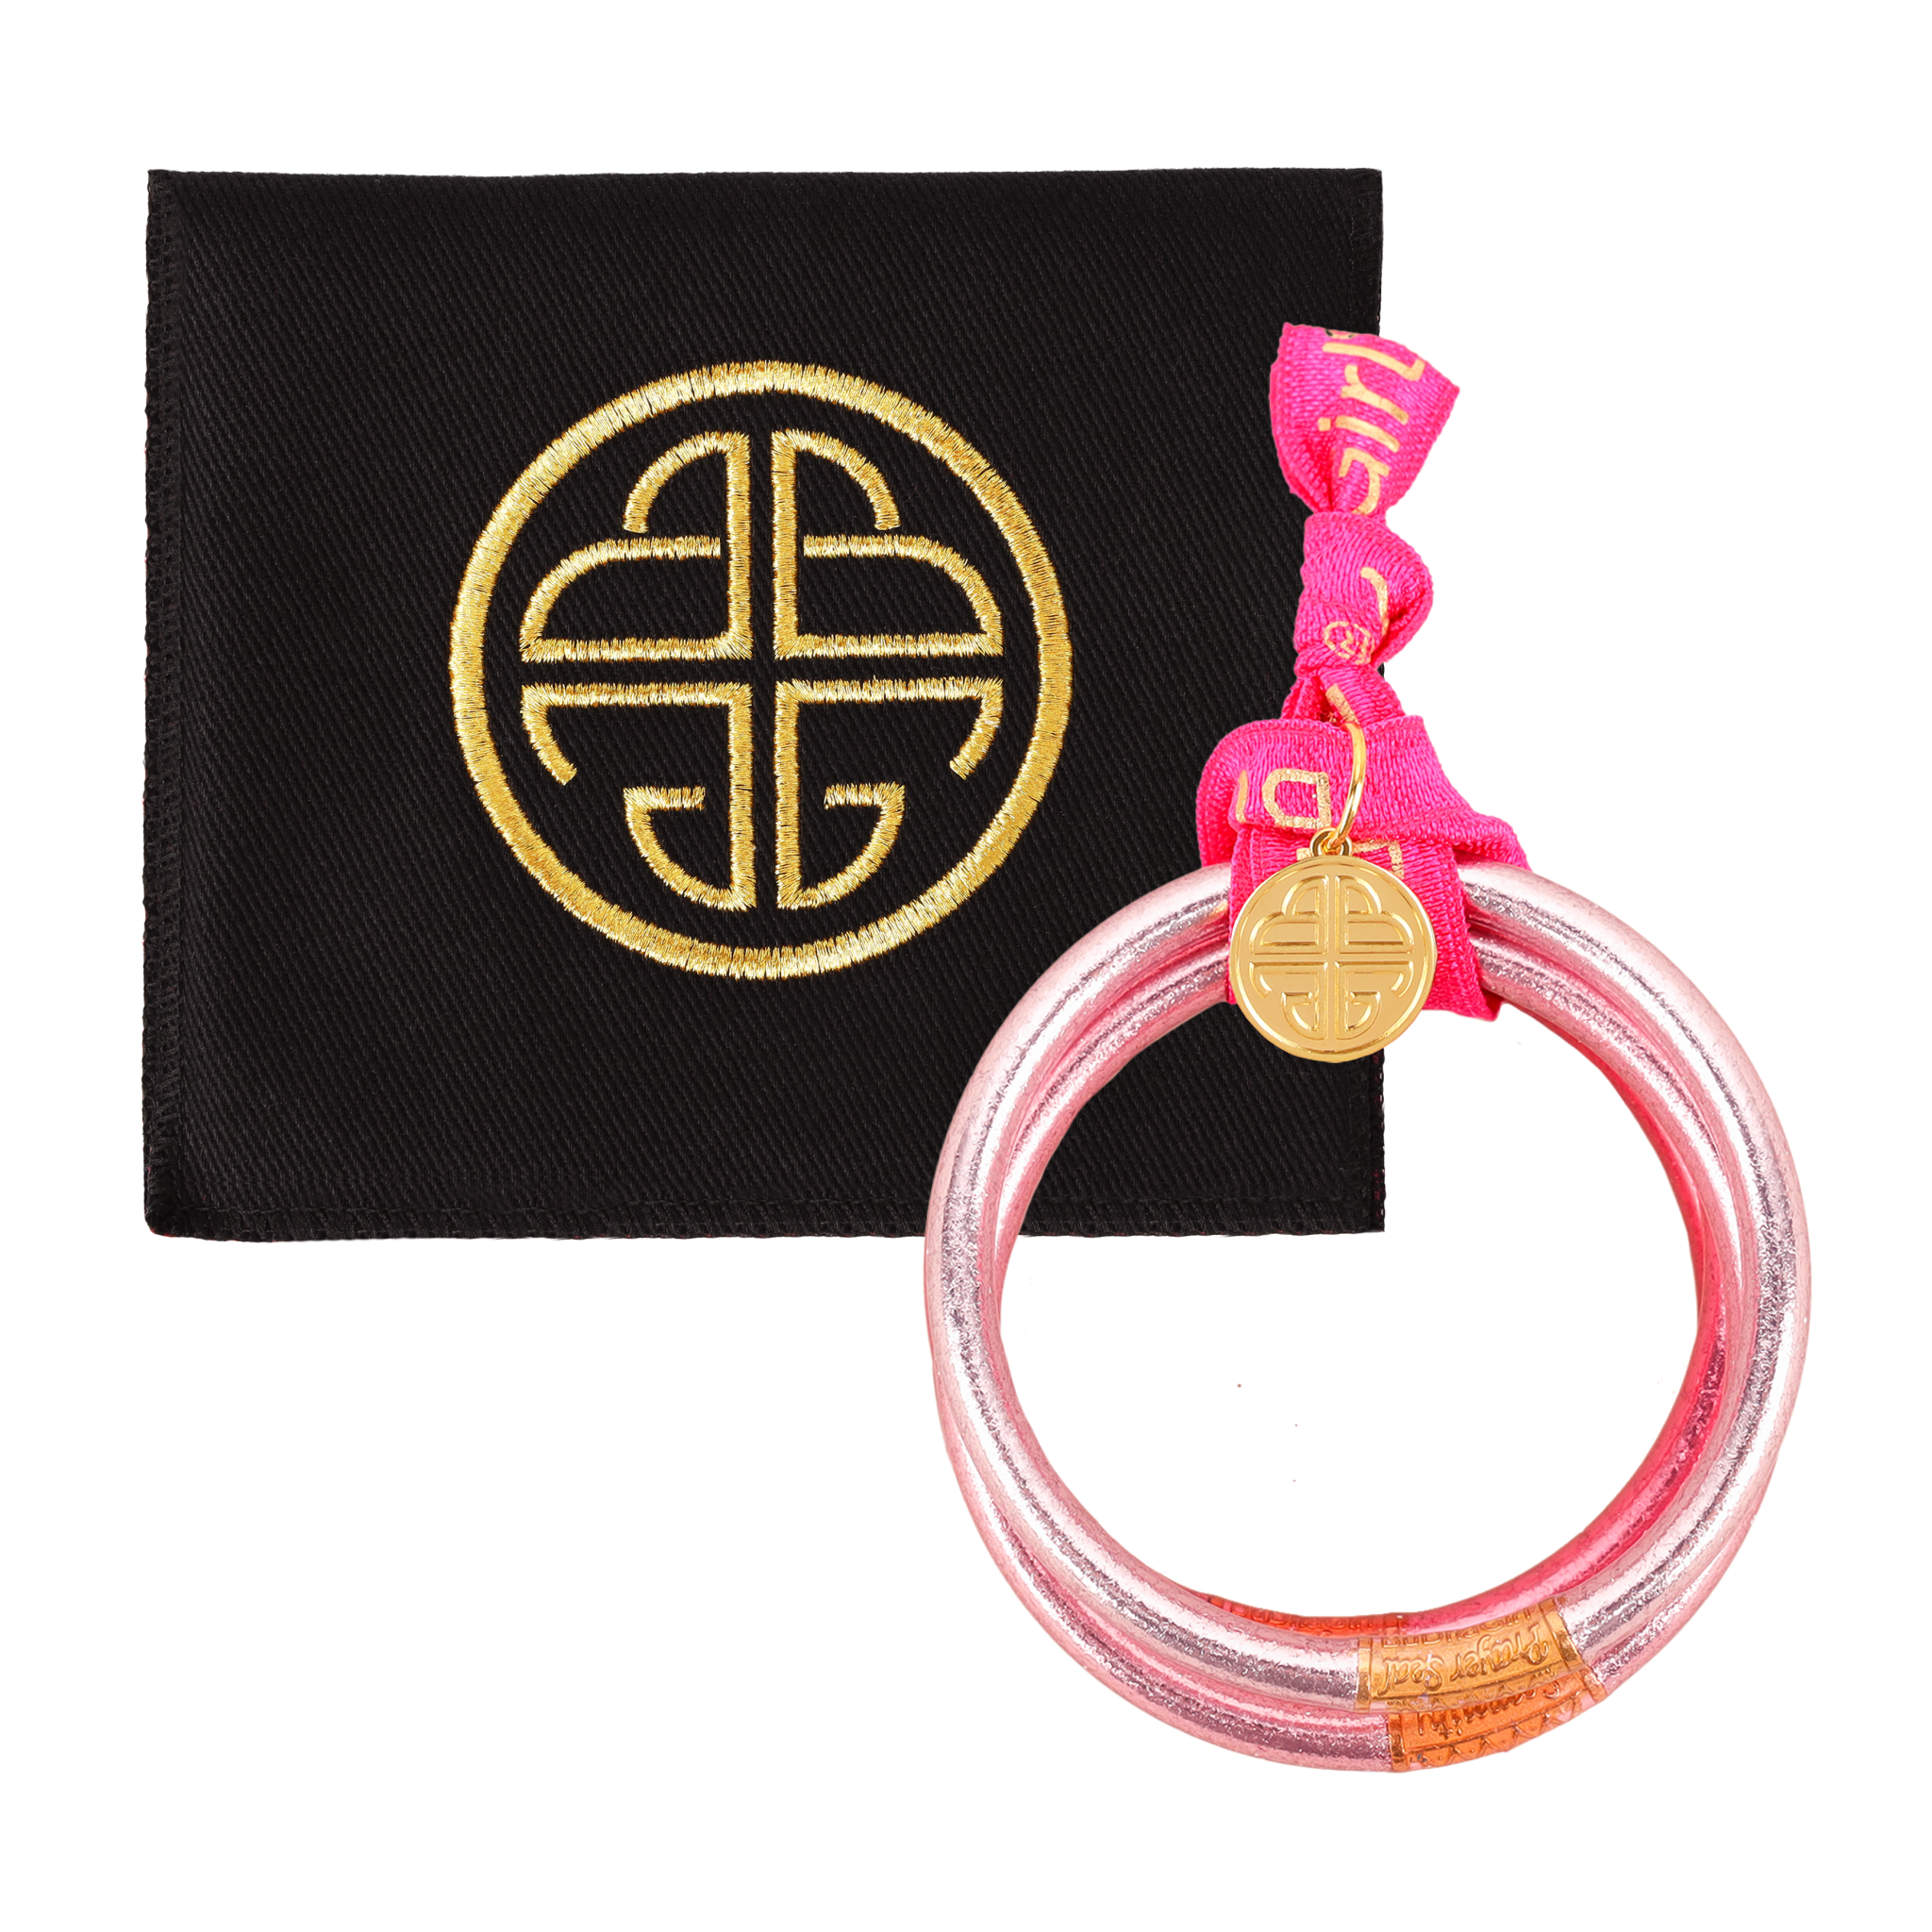 BuDhaGirl | Set of Four | All Weather Bangles in Carousel Pink - Giddy Up Glamour Boutique